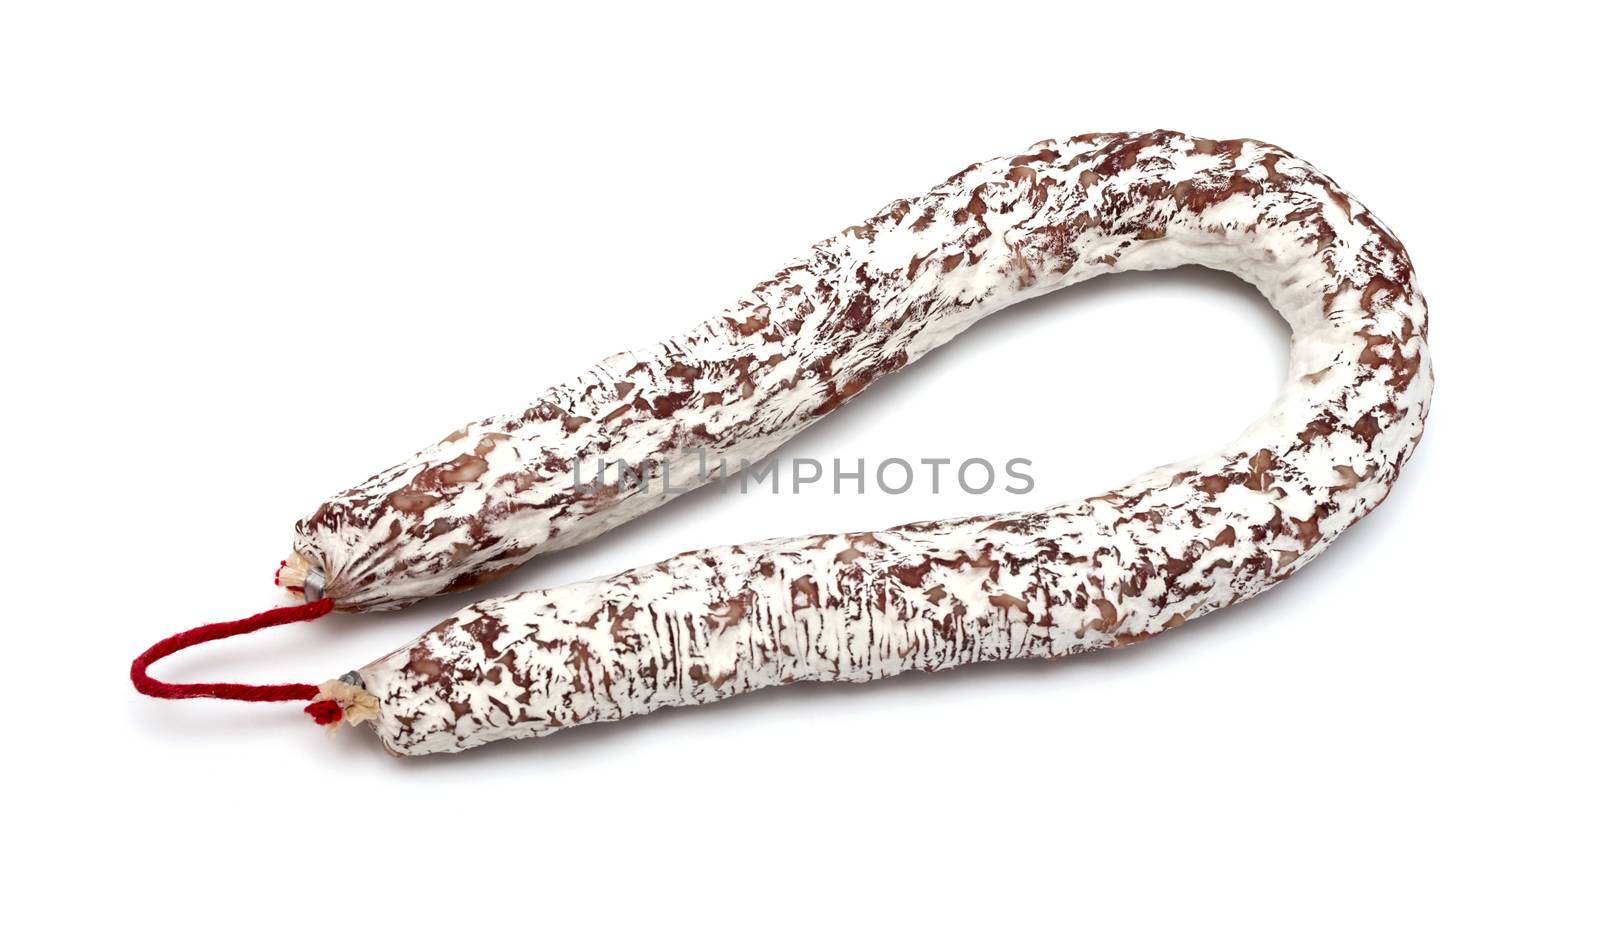 Ring of sausage isolated on a white background by DNKSTUDIO